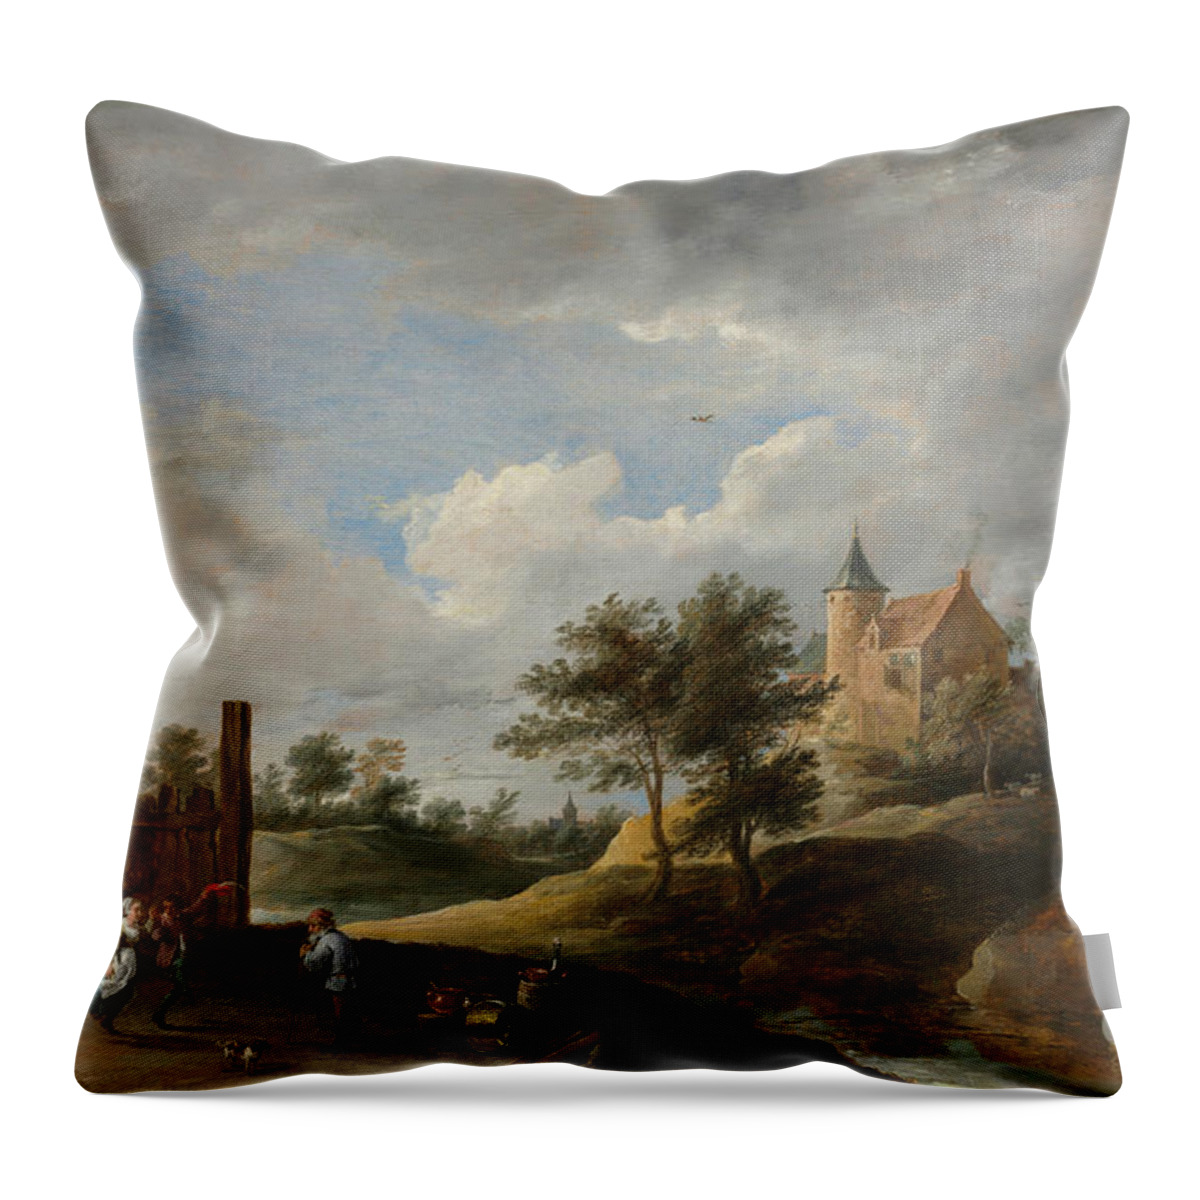 17th Century Throw Pillow featuring the painting Landscape With Peasants Dancing, C.1645-50 by David The Younger Teniers